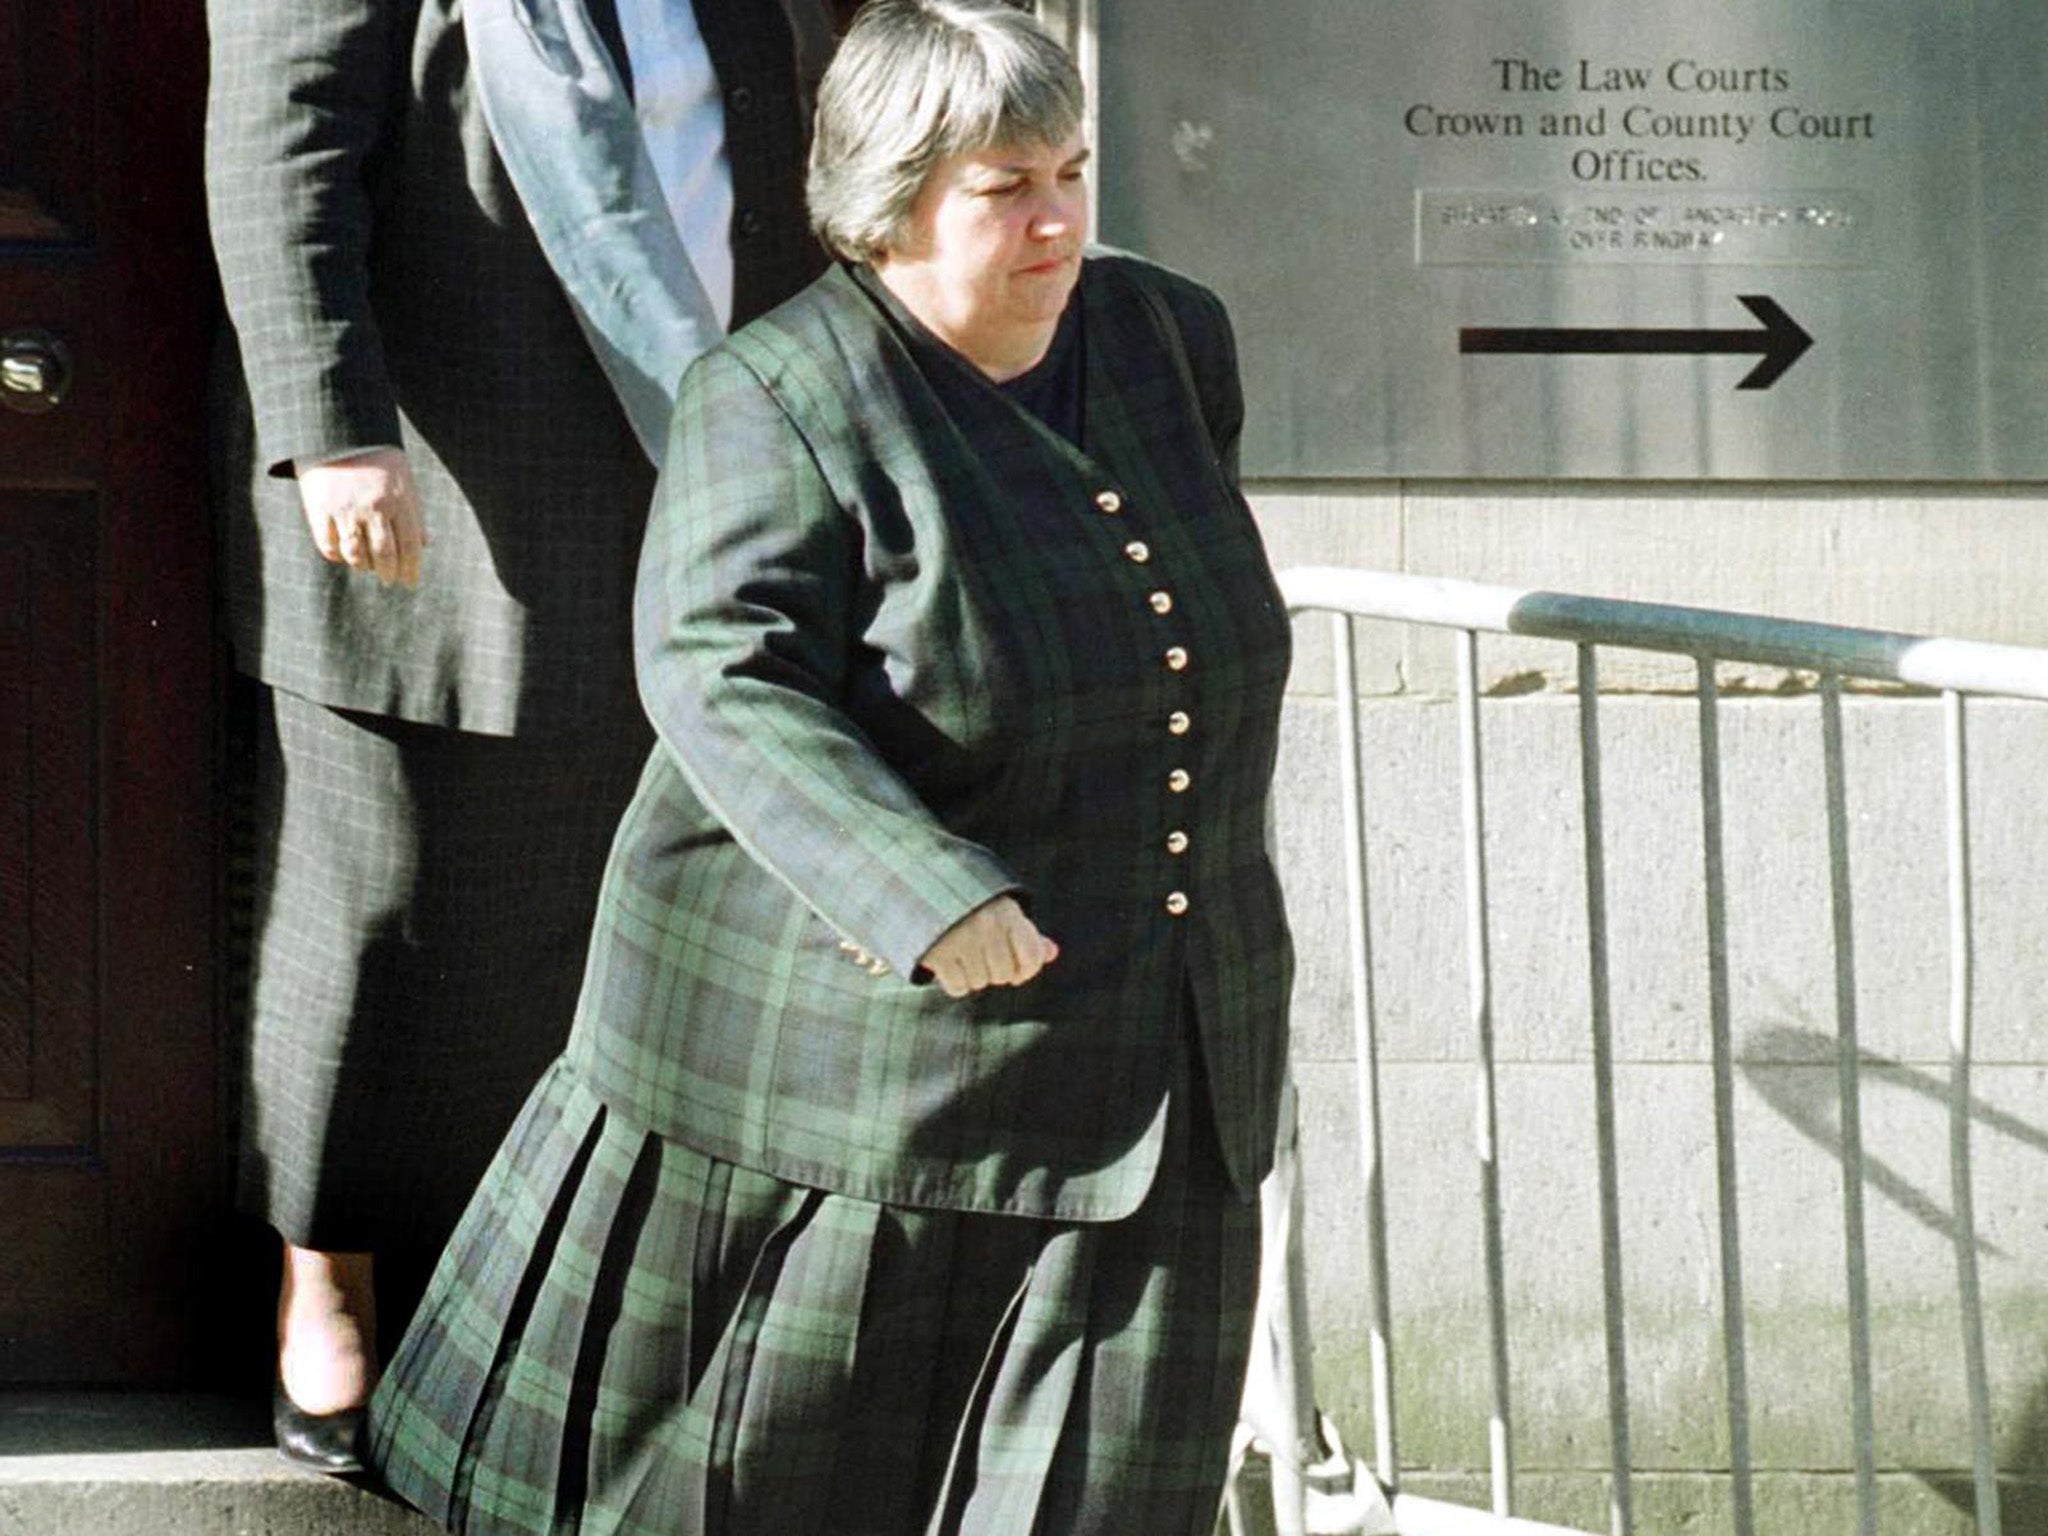 Primrose Shipman, pictured here in 1999, would get a £100k lump sum and £10,000 a year if her husband died before the age of 60